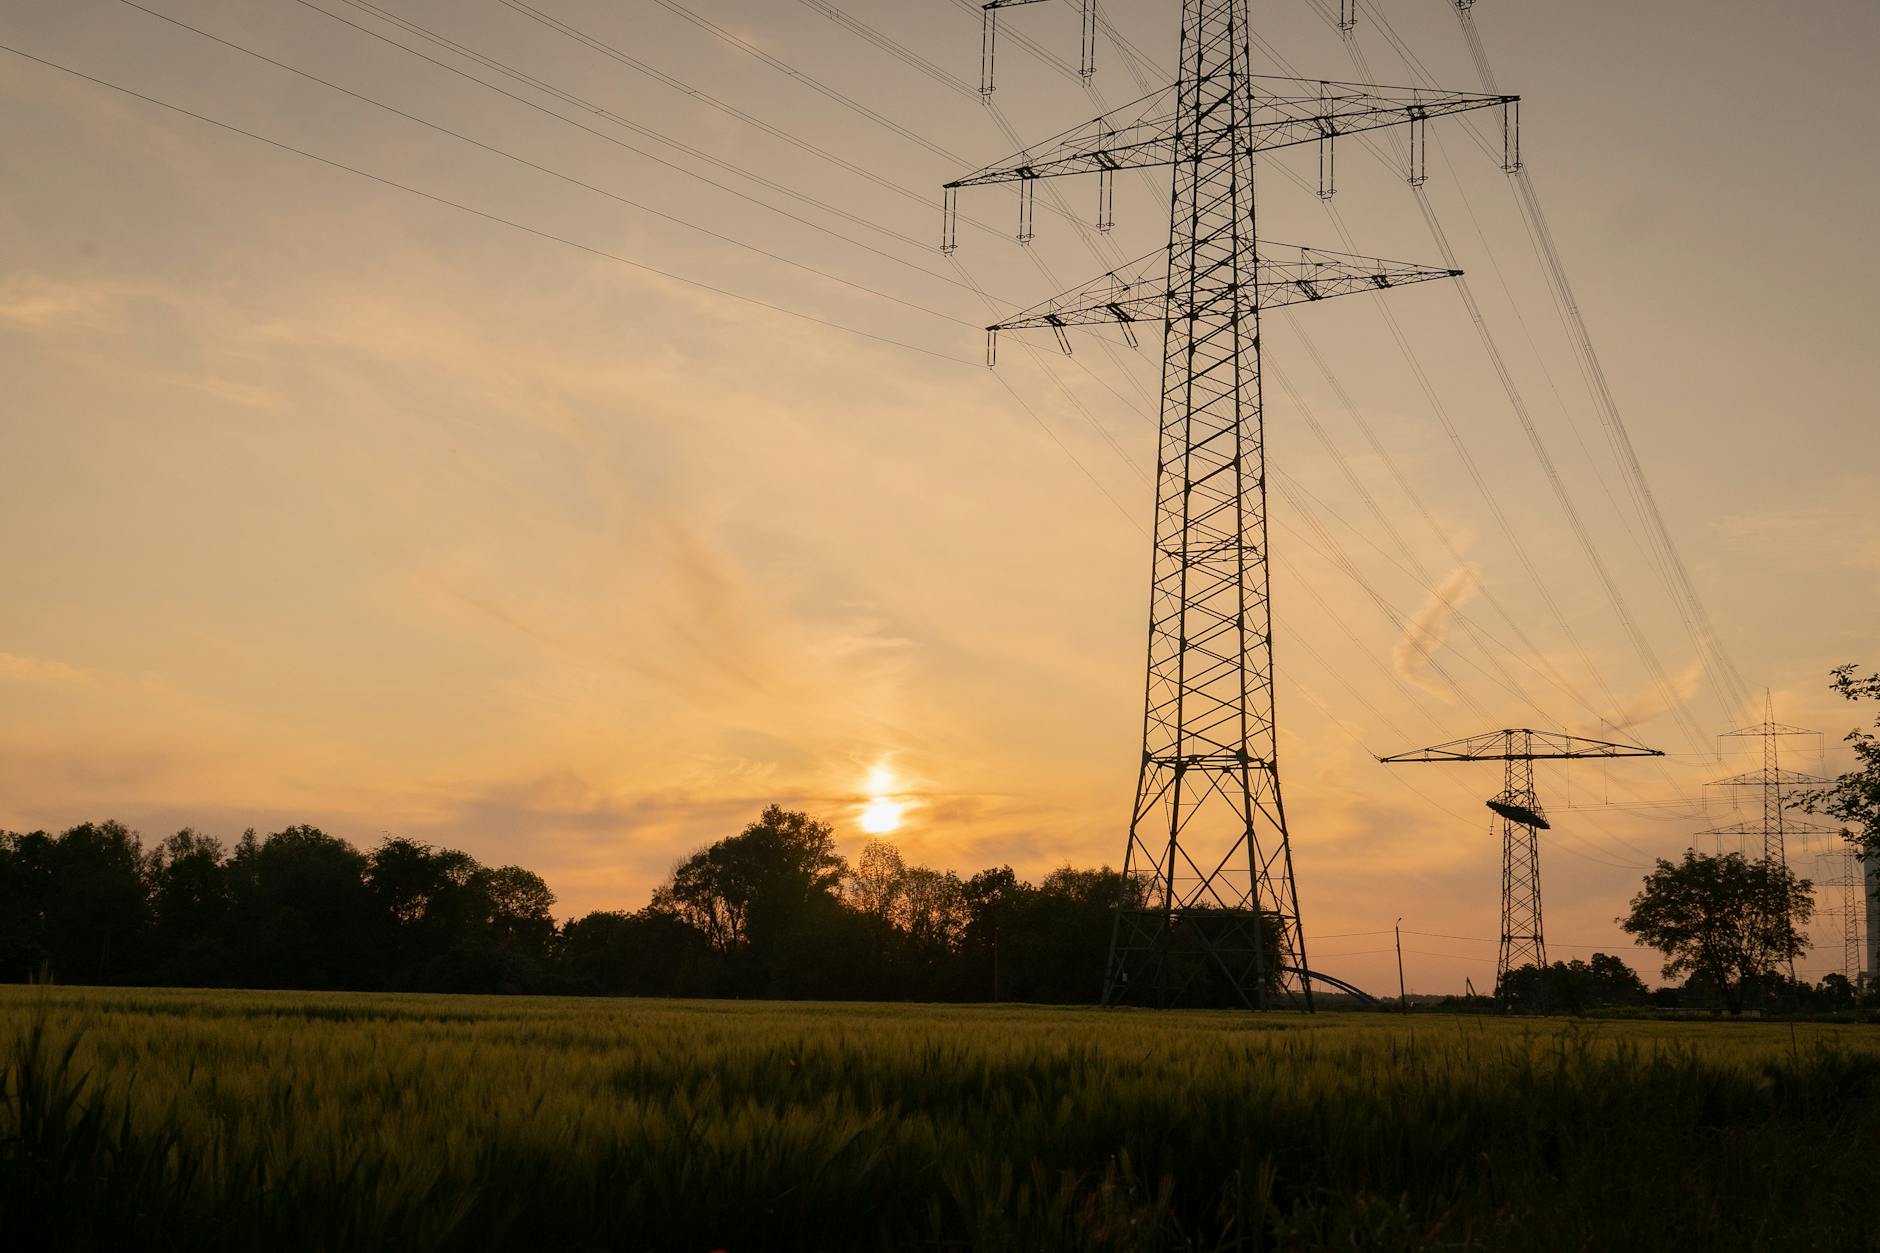 view of a meadow with utility poles and trees in the countryside at sunset